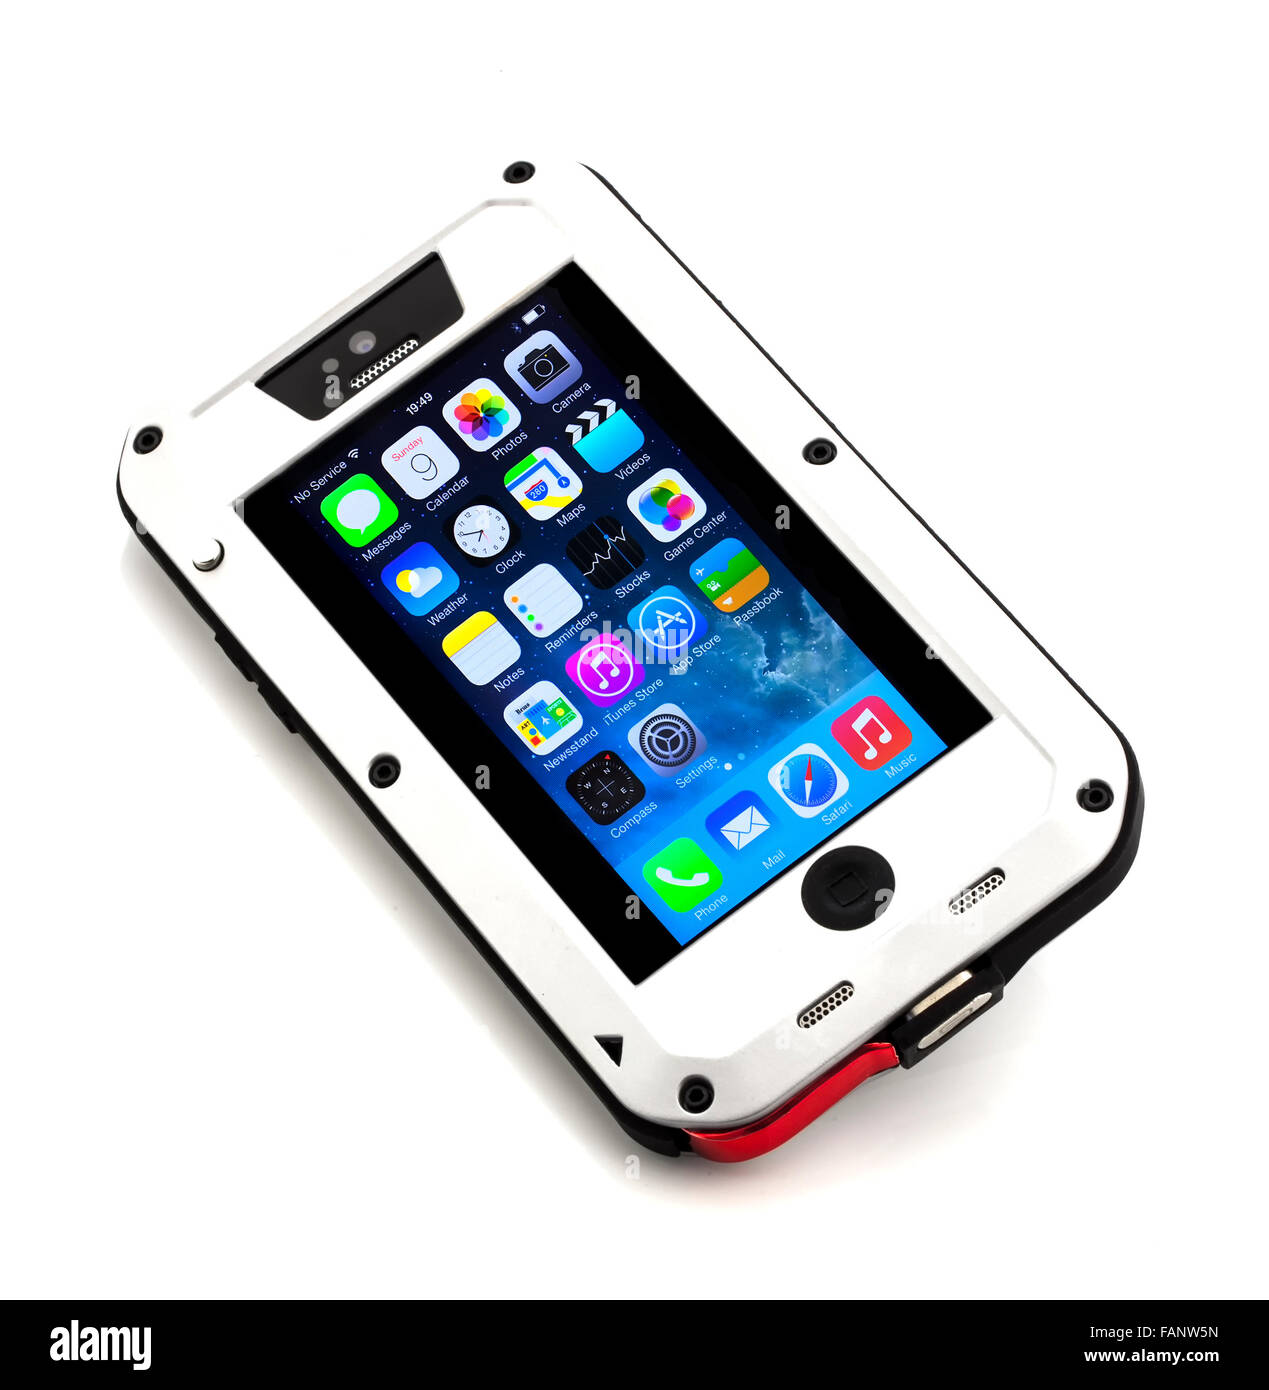 New Apple iPhone 5S in a rugged case on a White Background. Stock Photo